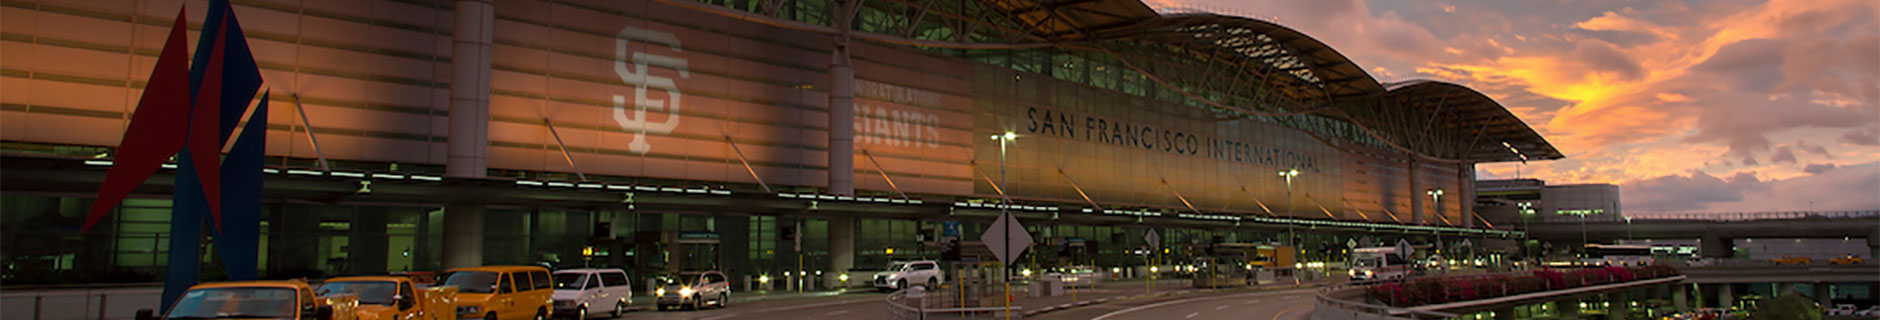 SFO Airport at sunset